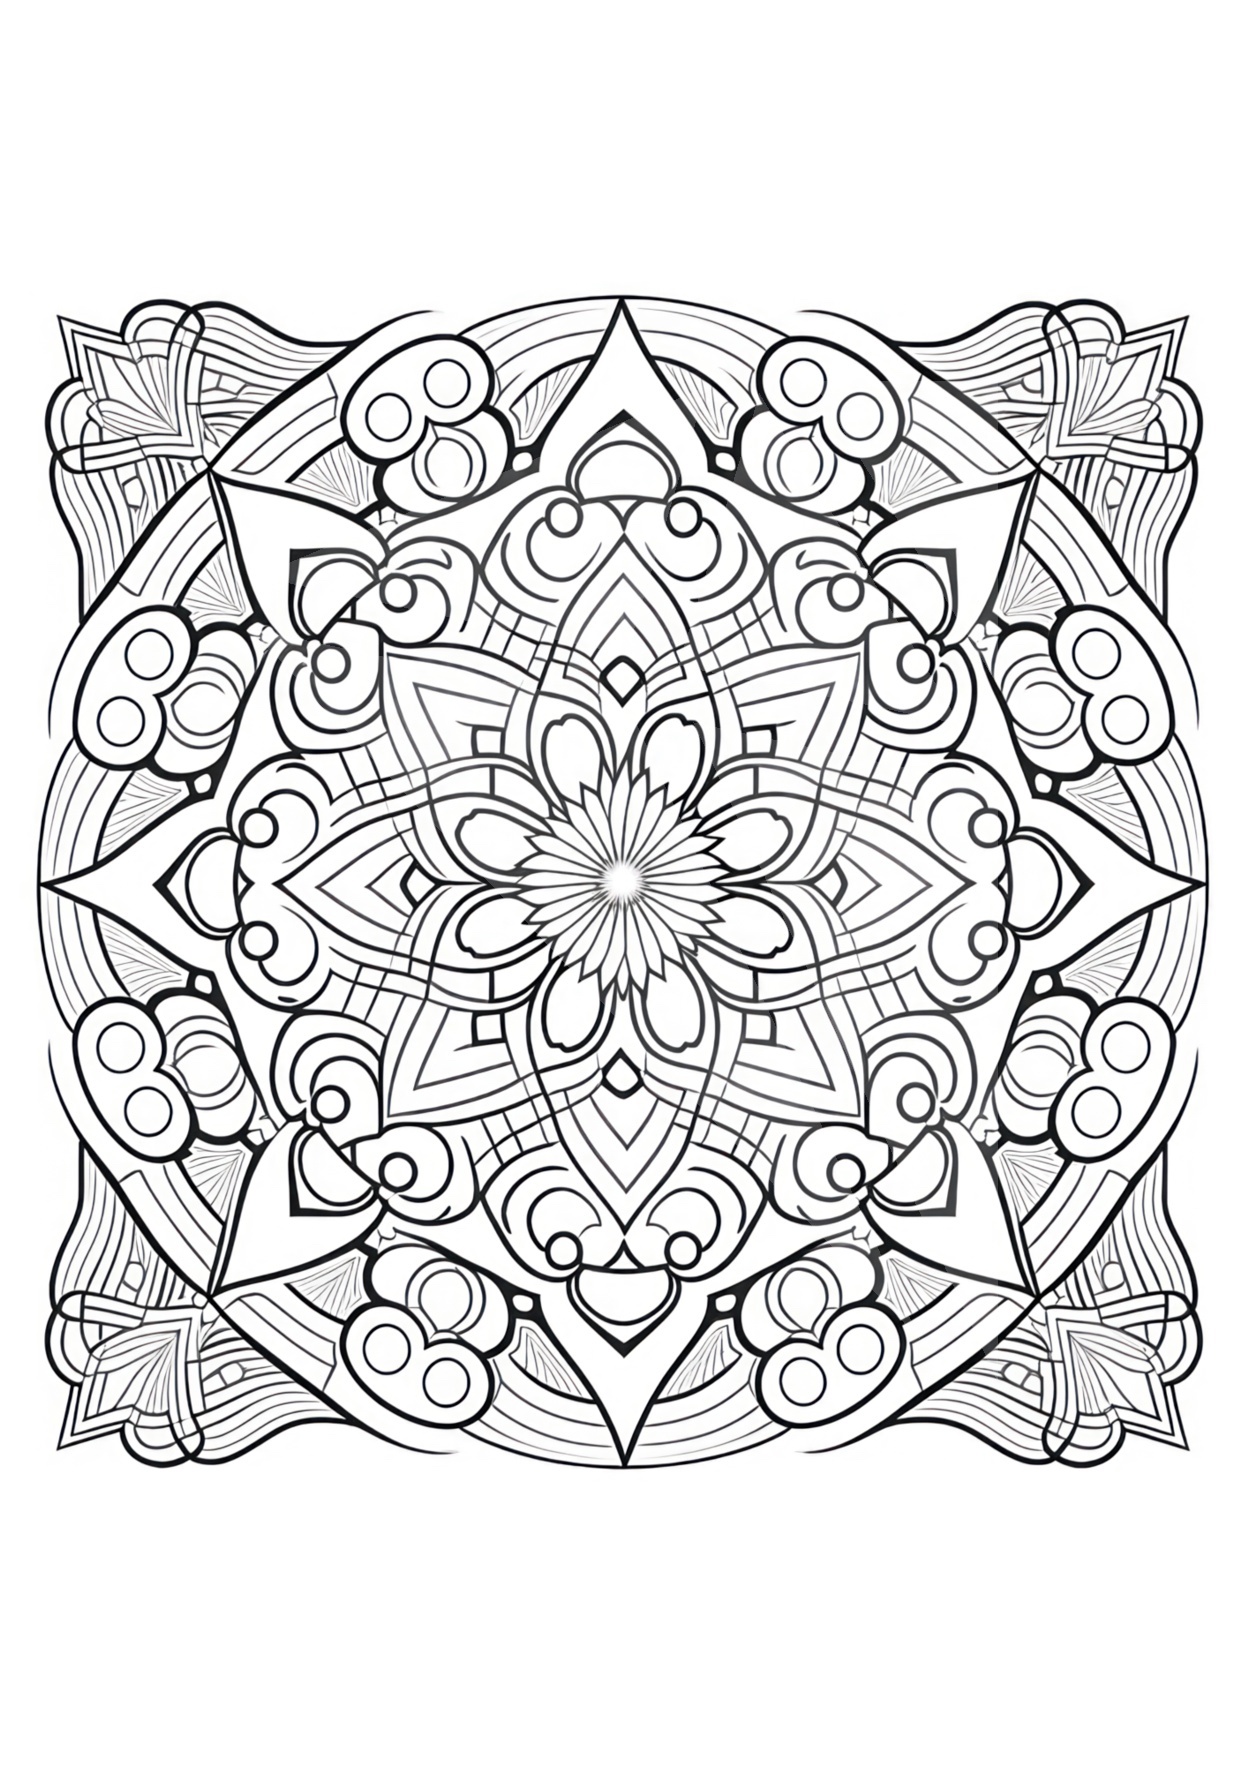 Mesmerizing mandala coloring pages for kids and adults